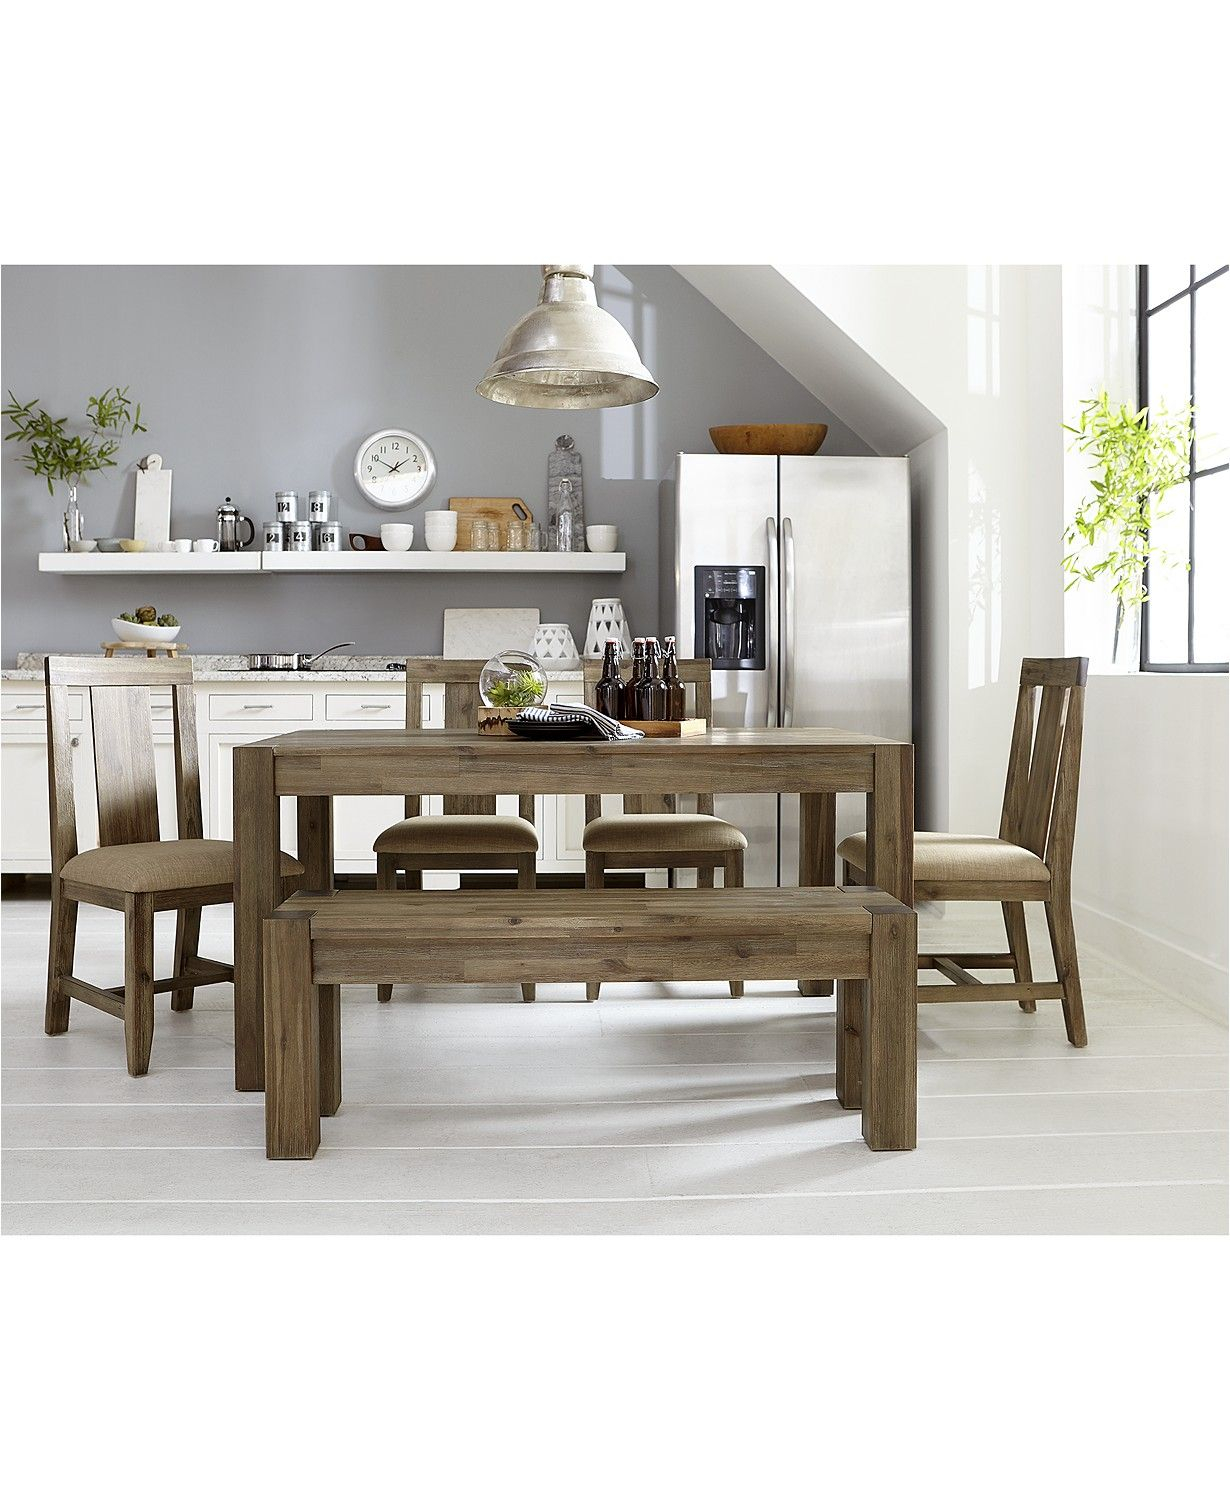 Macys Small Dining Room Sets • Faucet Ideas Site